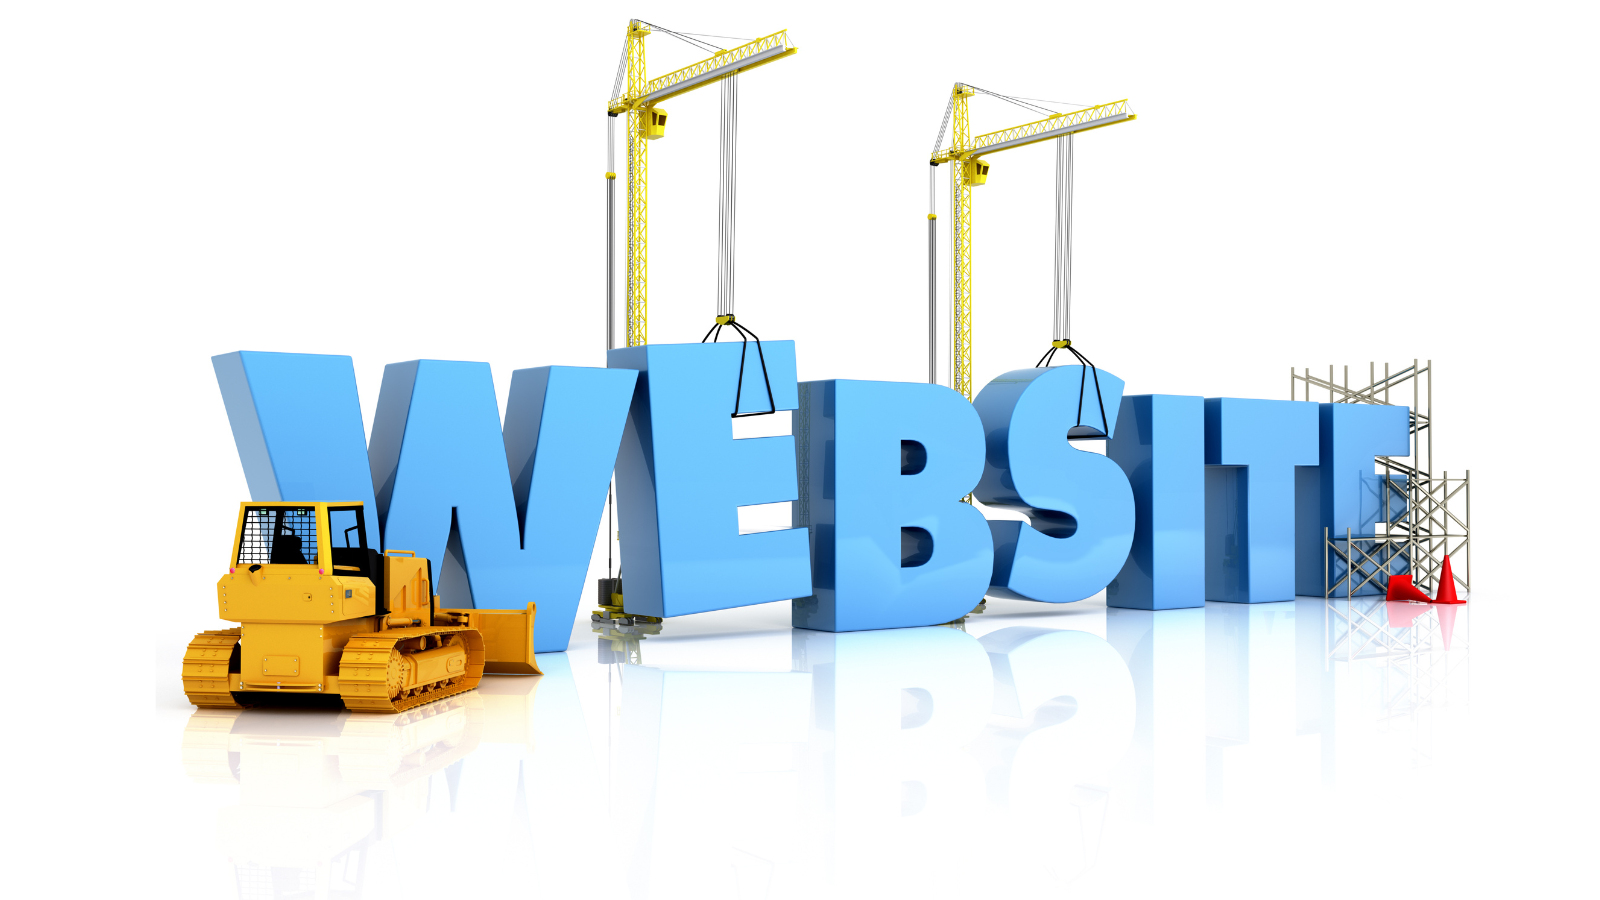 What Does Your Website Say About Your Business?